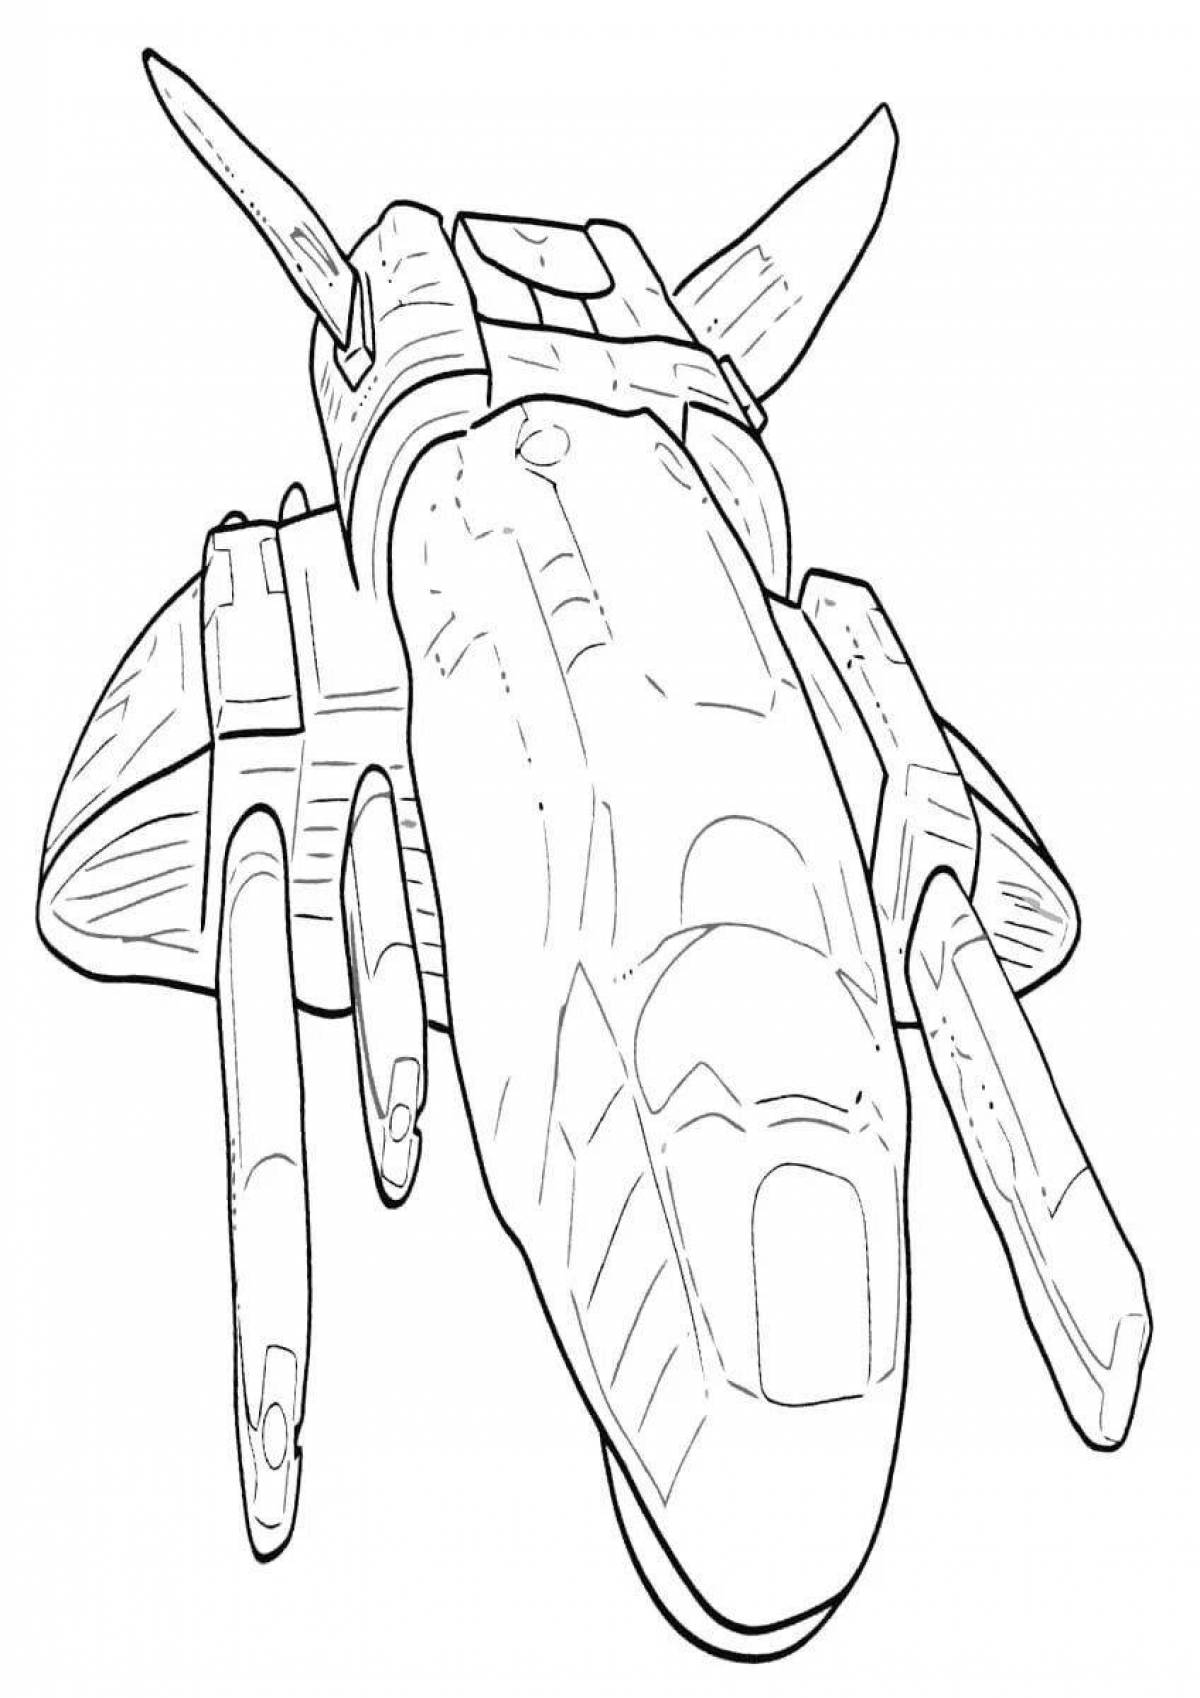 Exciting spaceship coloring page